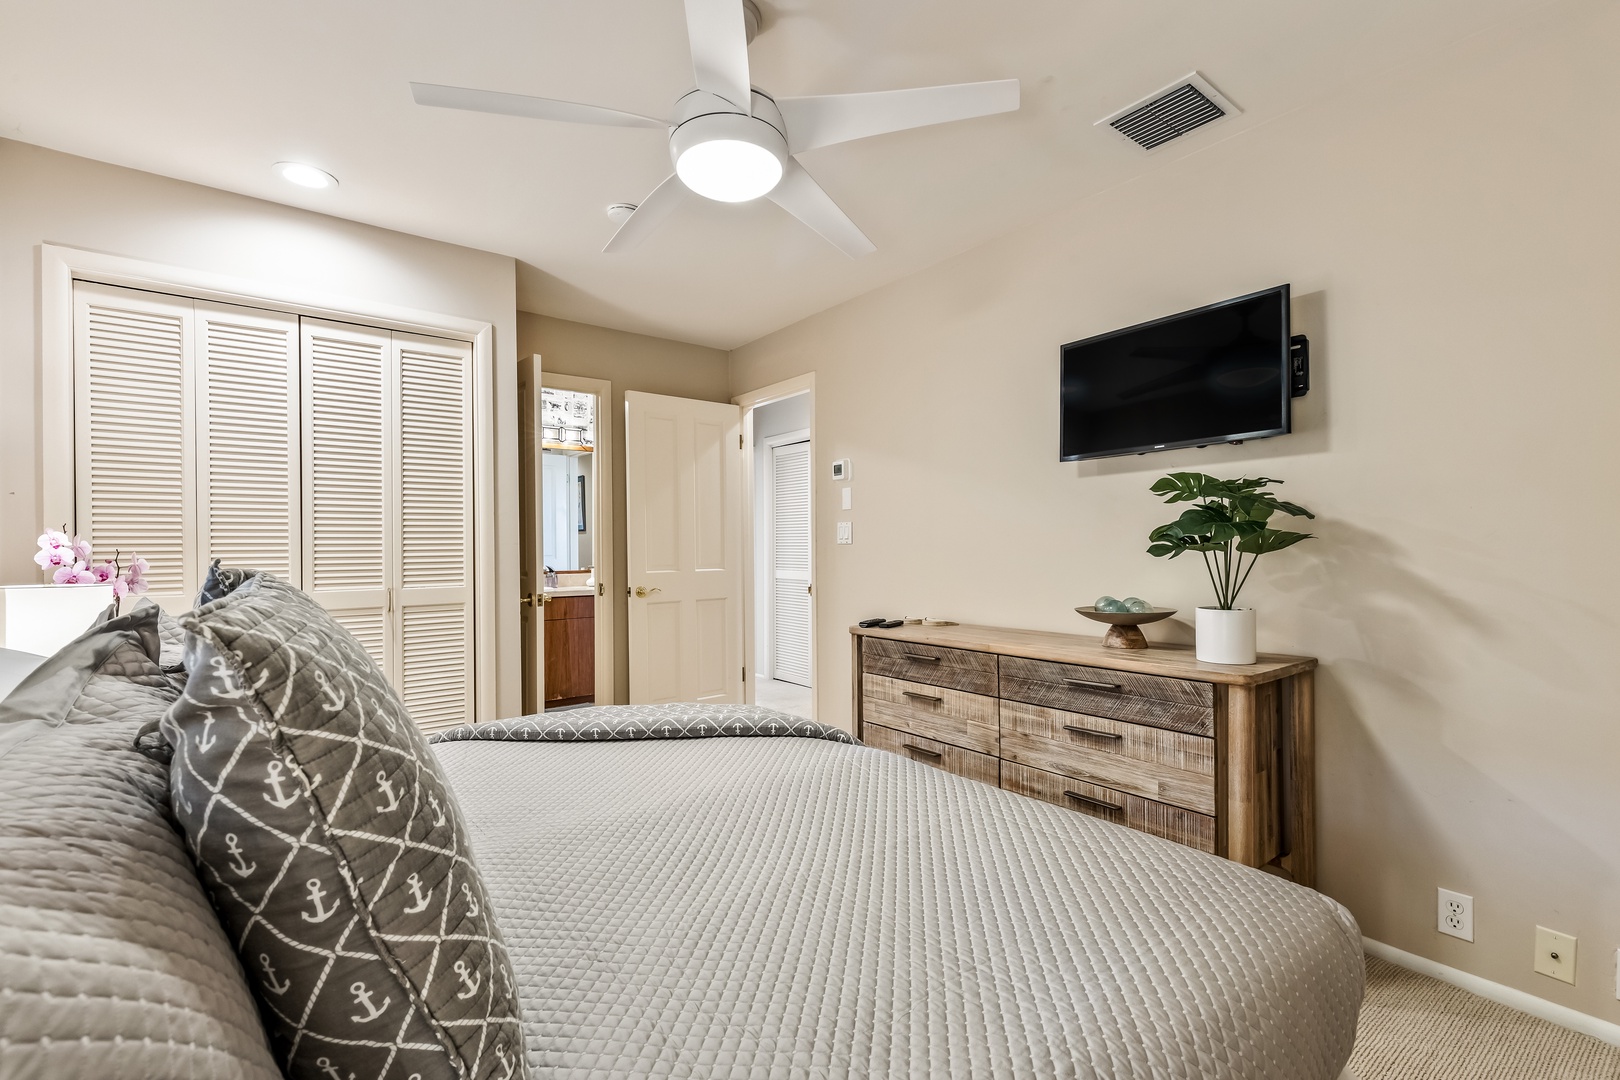 Honolulu Vacation Rentals, Hale Ola - Each bedroom has its own television